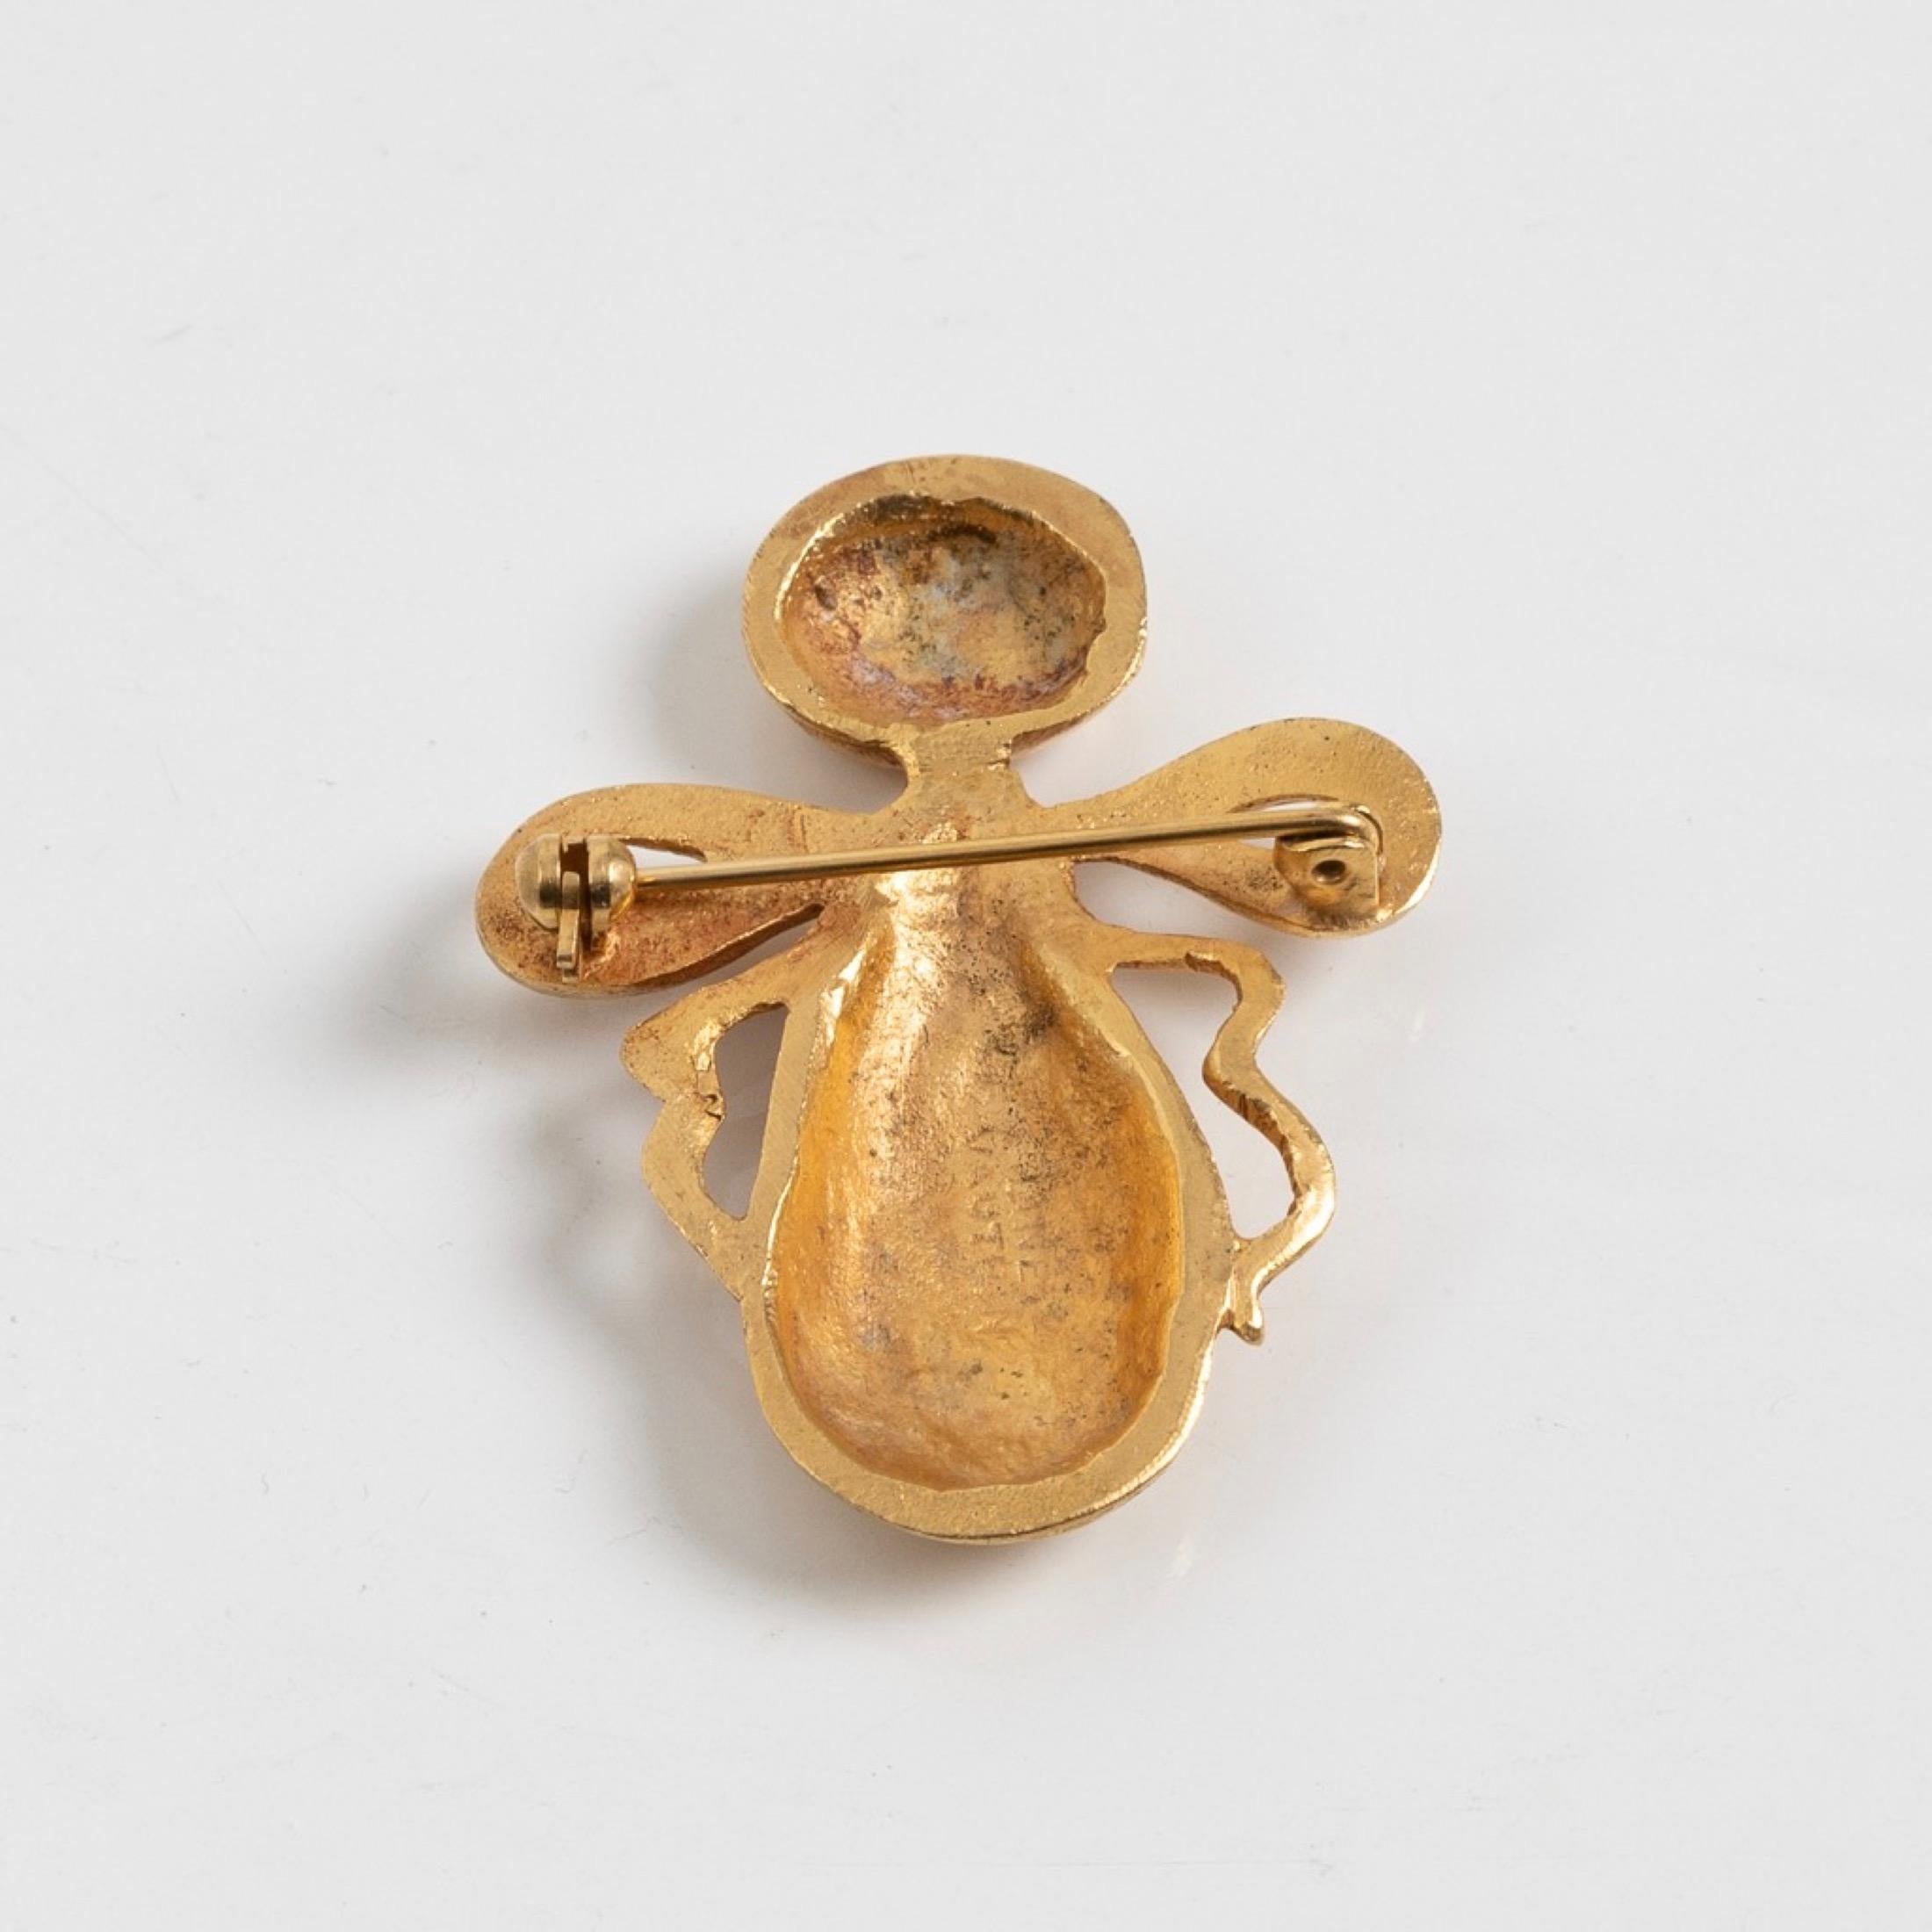 French L’abeille Hybride 'the Hybrid Bee' by Line Vautrin, Gilt Bronze Brooch, France